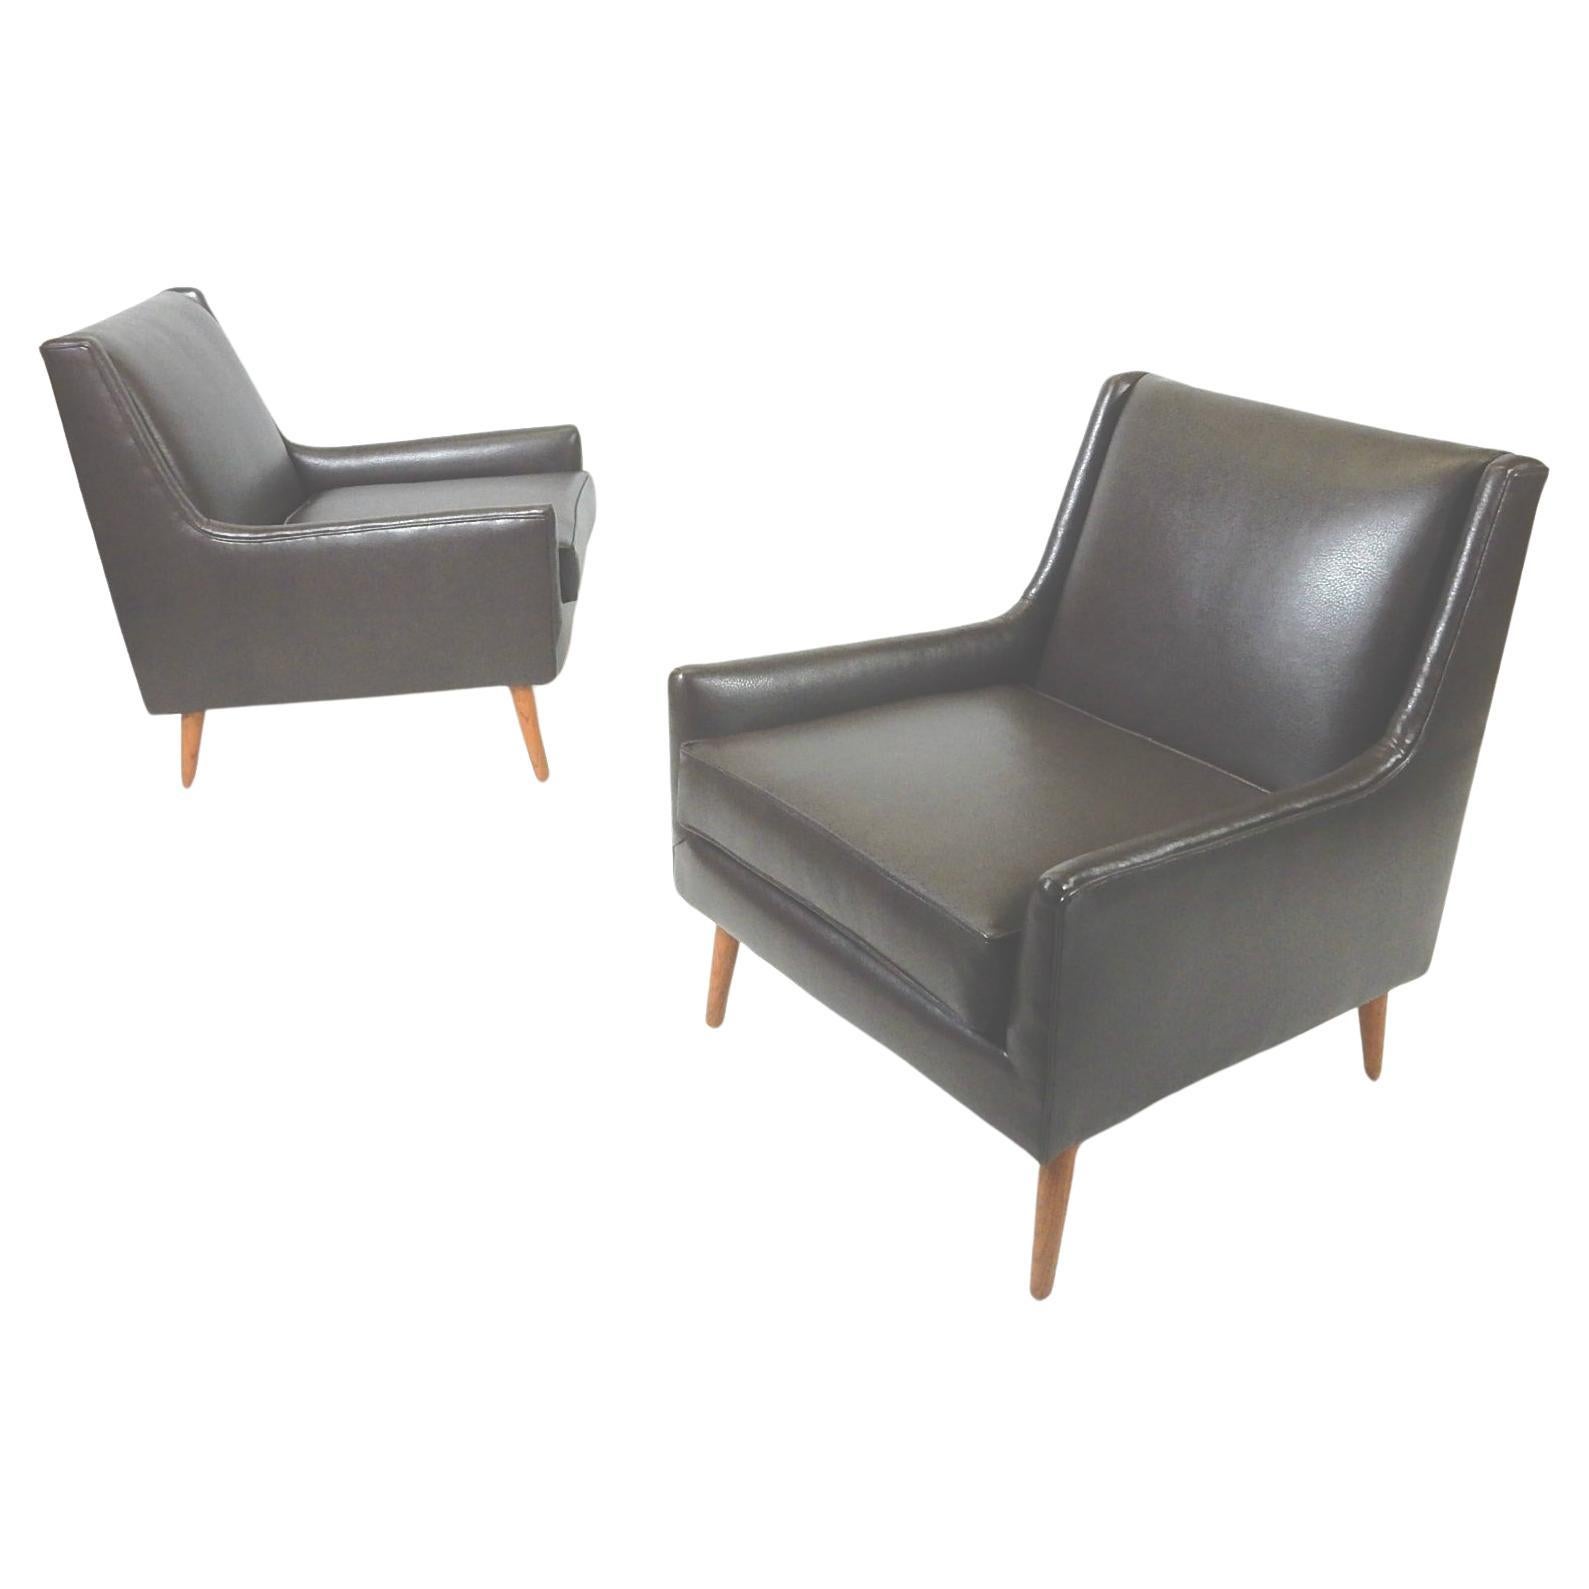 Mid-20th Century 1950s Mid-Century Modern Lounge Chair Pair For Sale